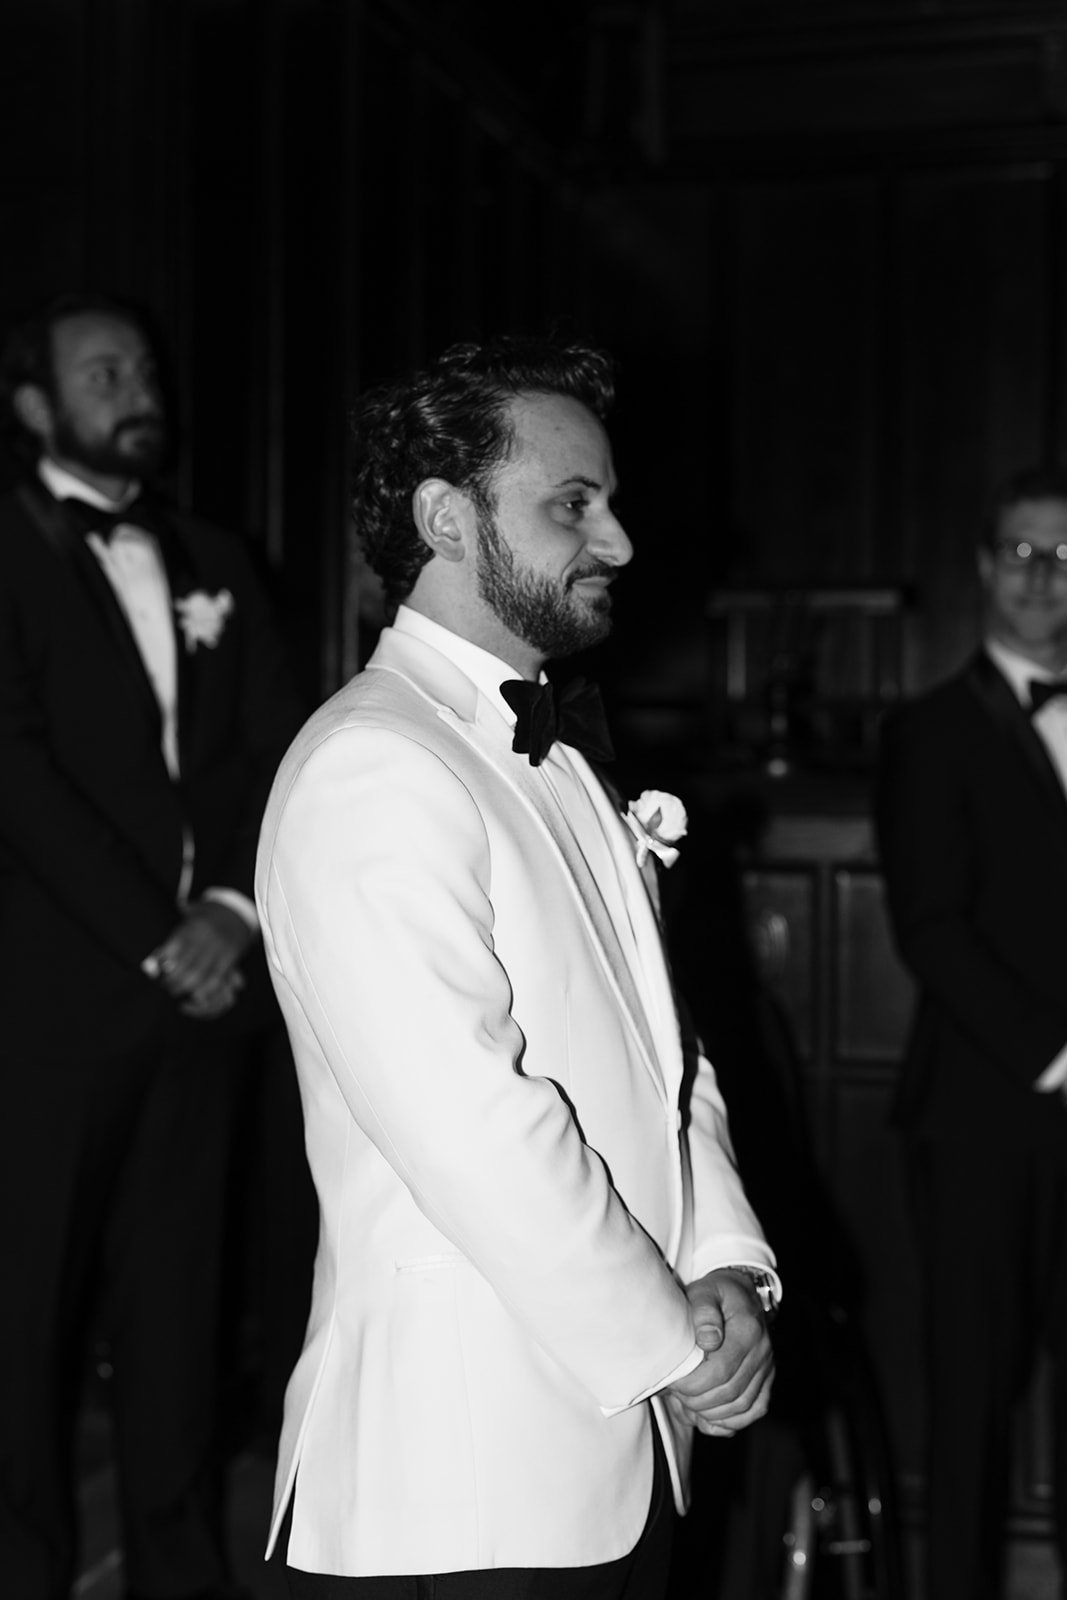 Groom anxiously awaits as his bride enters the elegant wedding ceremony